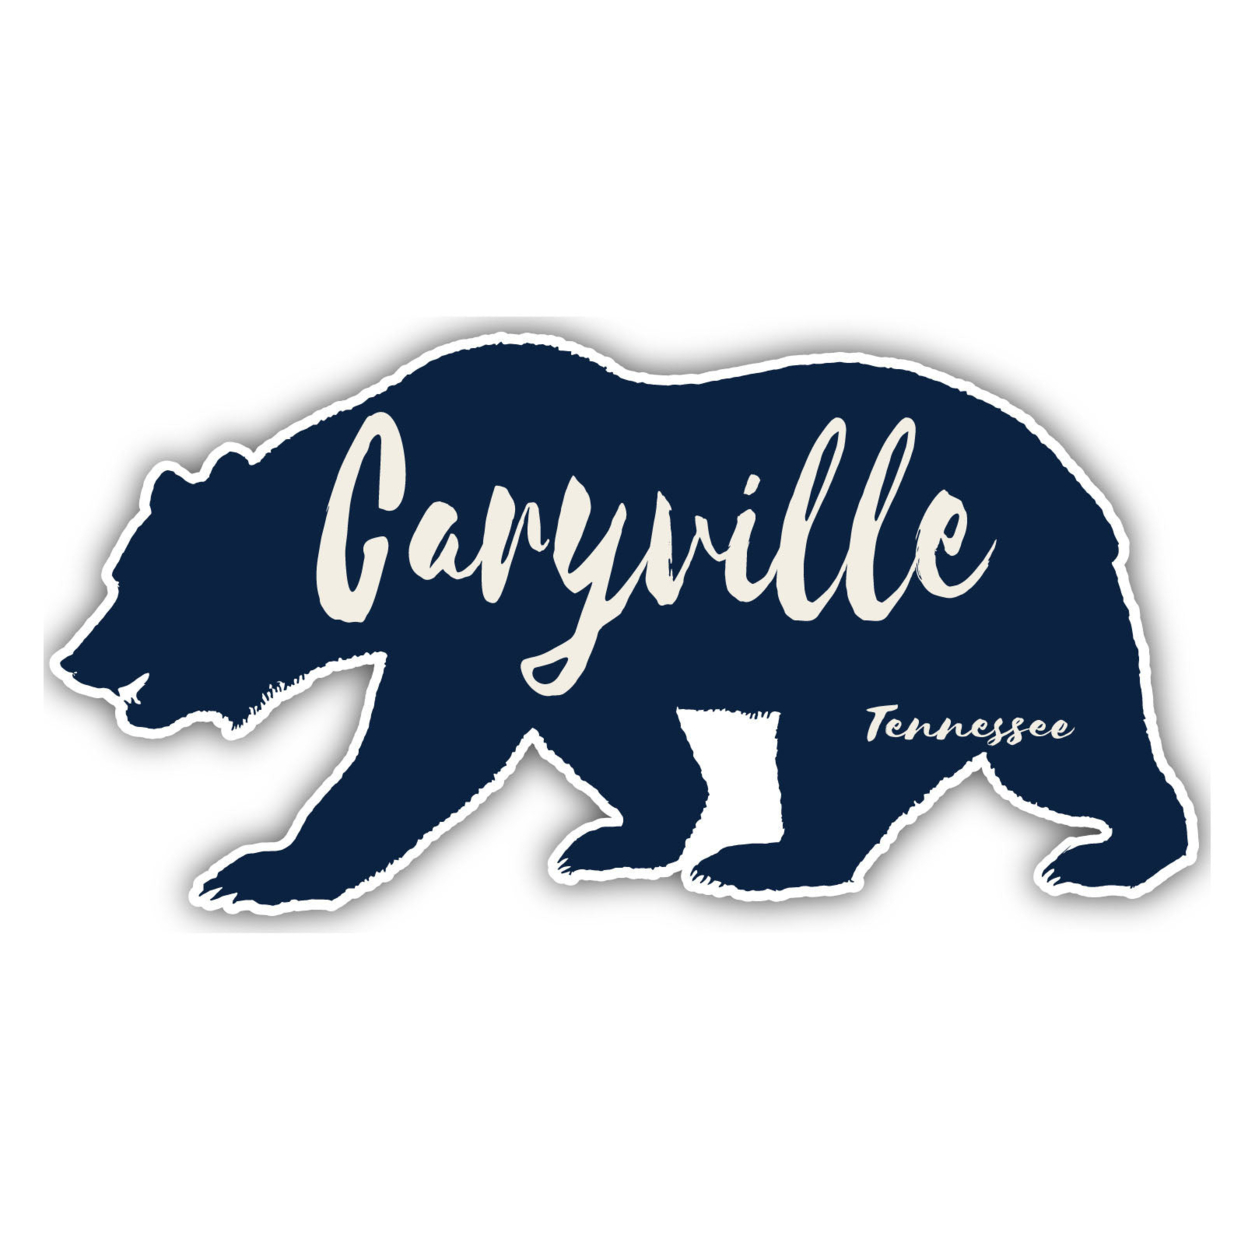 Caryville Tennessee Souvenir Decorative Stickers (Choose Theme And Size) - 4-Pack, 4-Inch, Tent